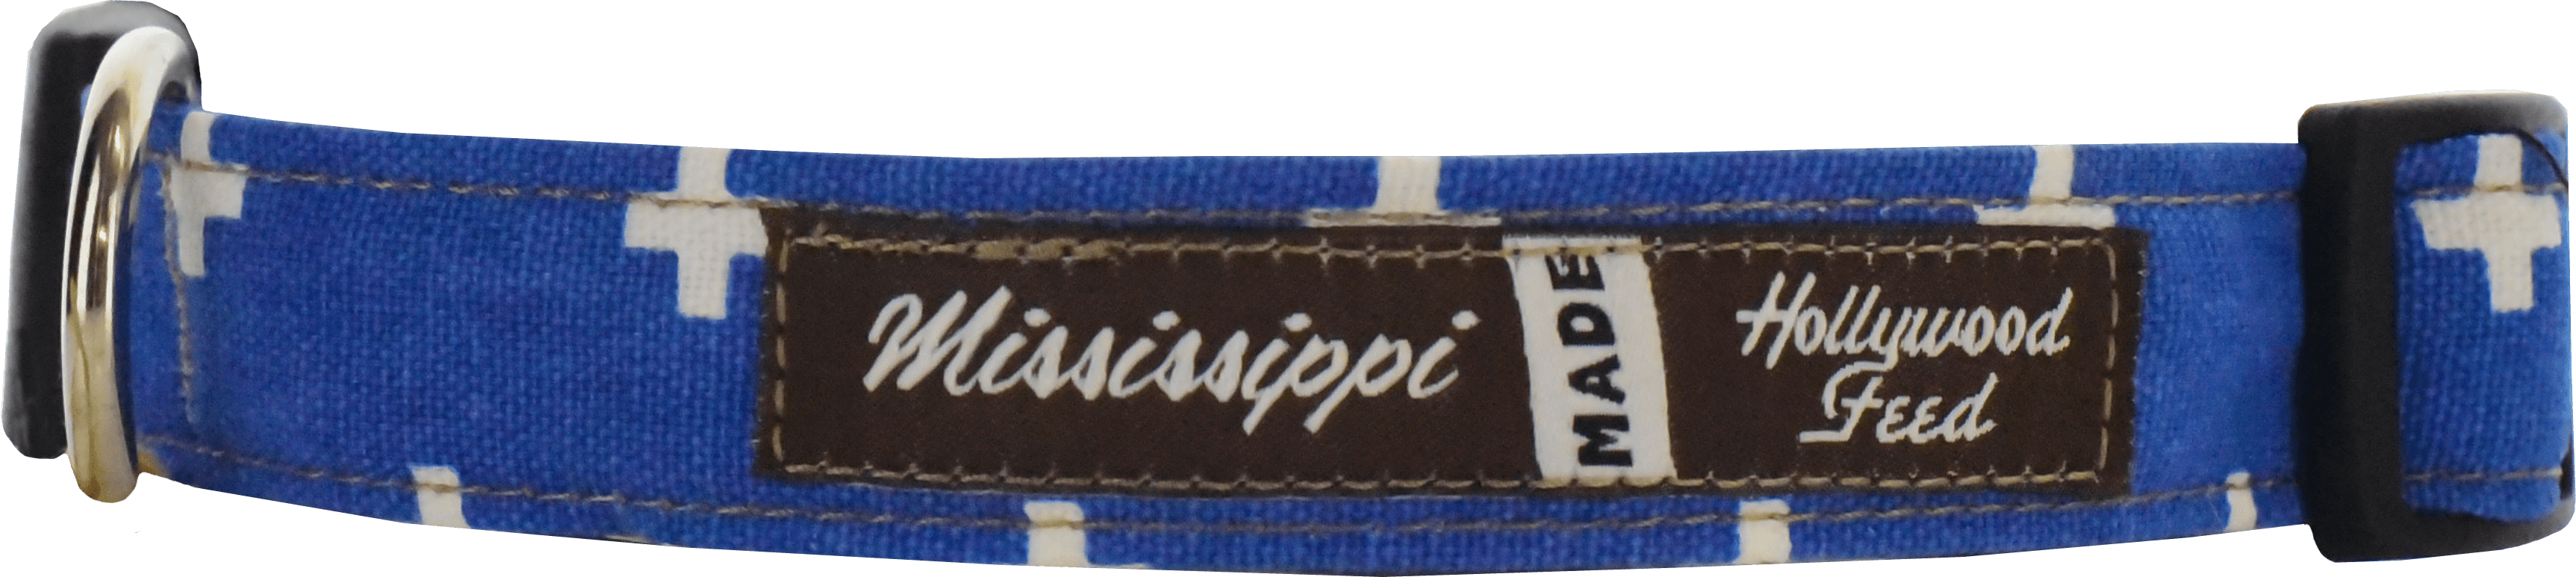 Hollywood feed mississippi made dog collar - blue cross